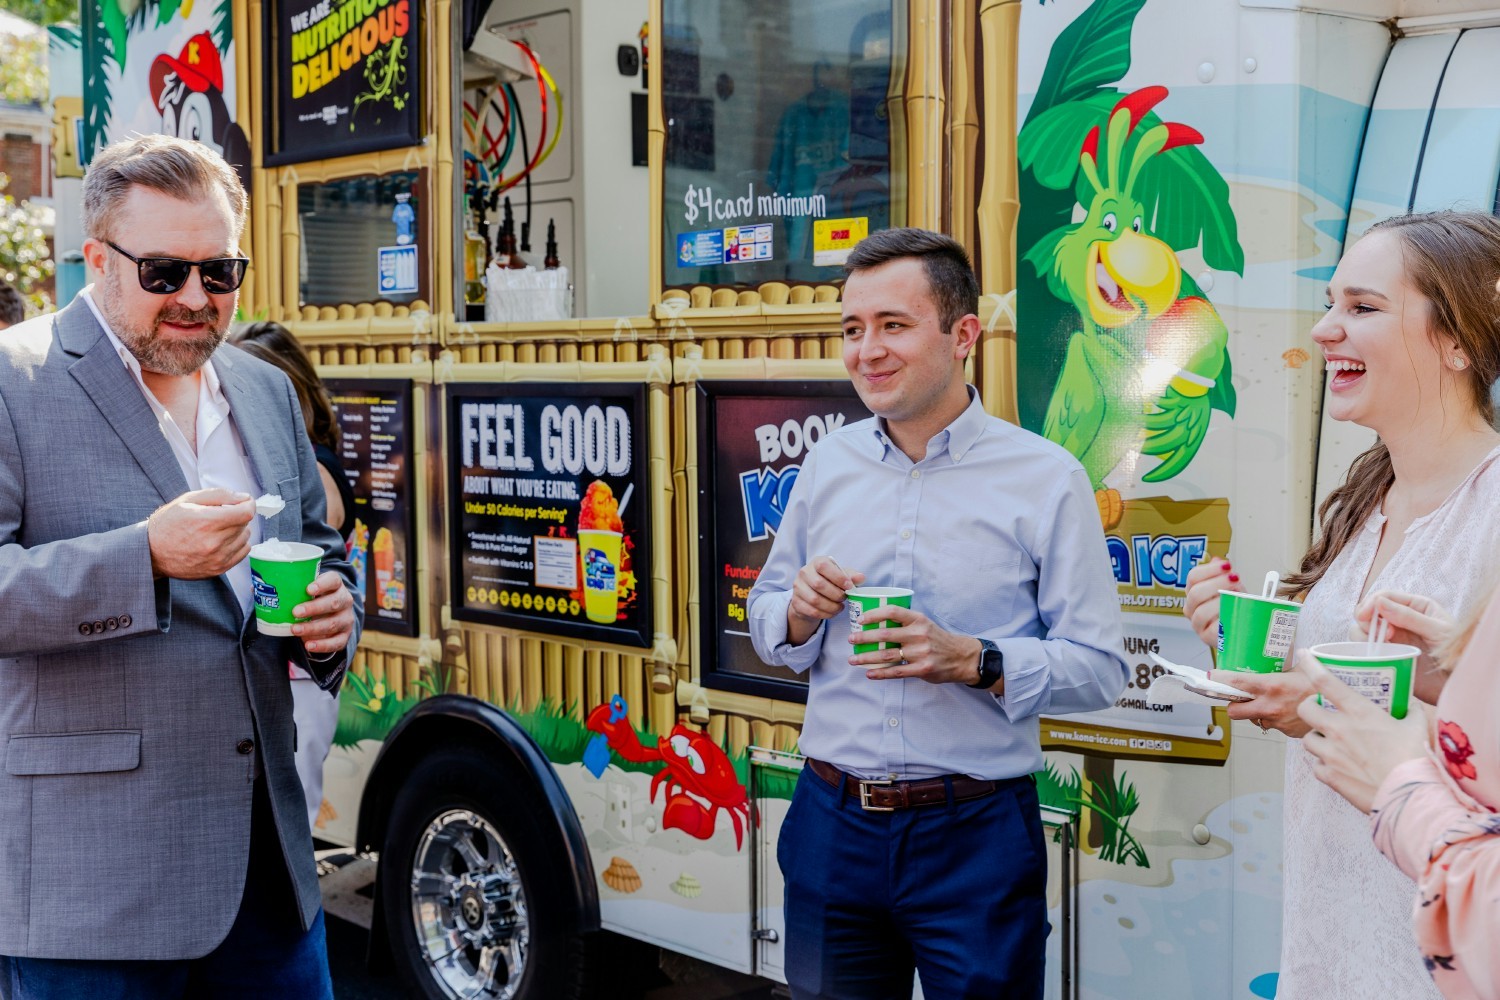 Our employees beating the summer heat while enjoying Kona Ice and building relationships with colleagues.